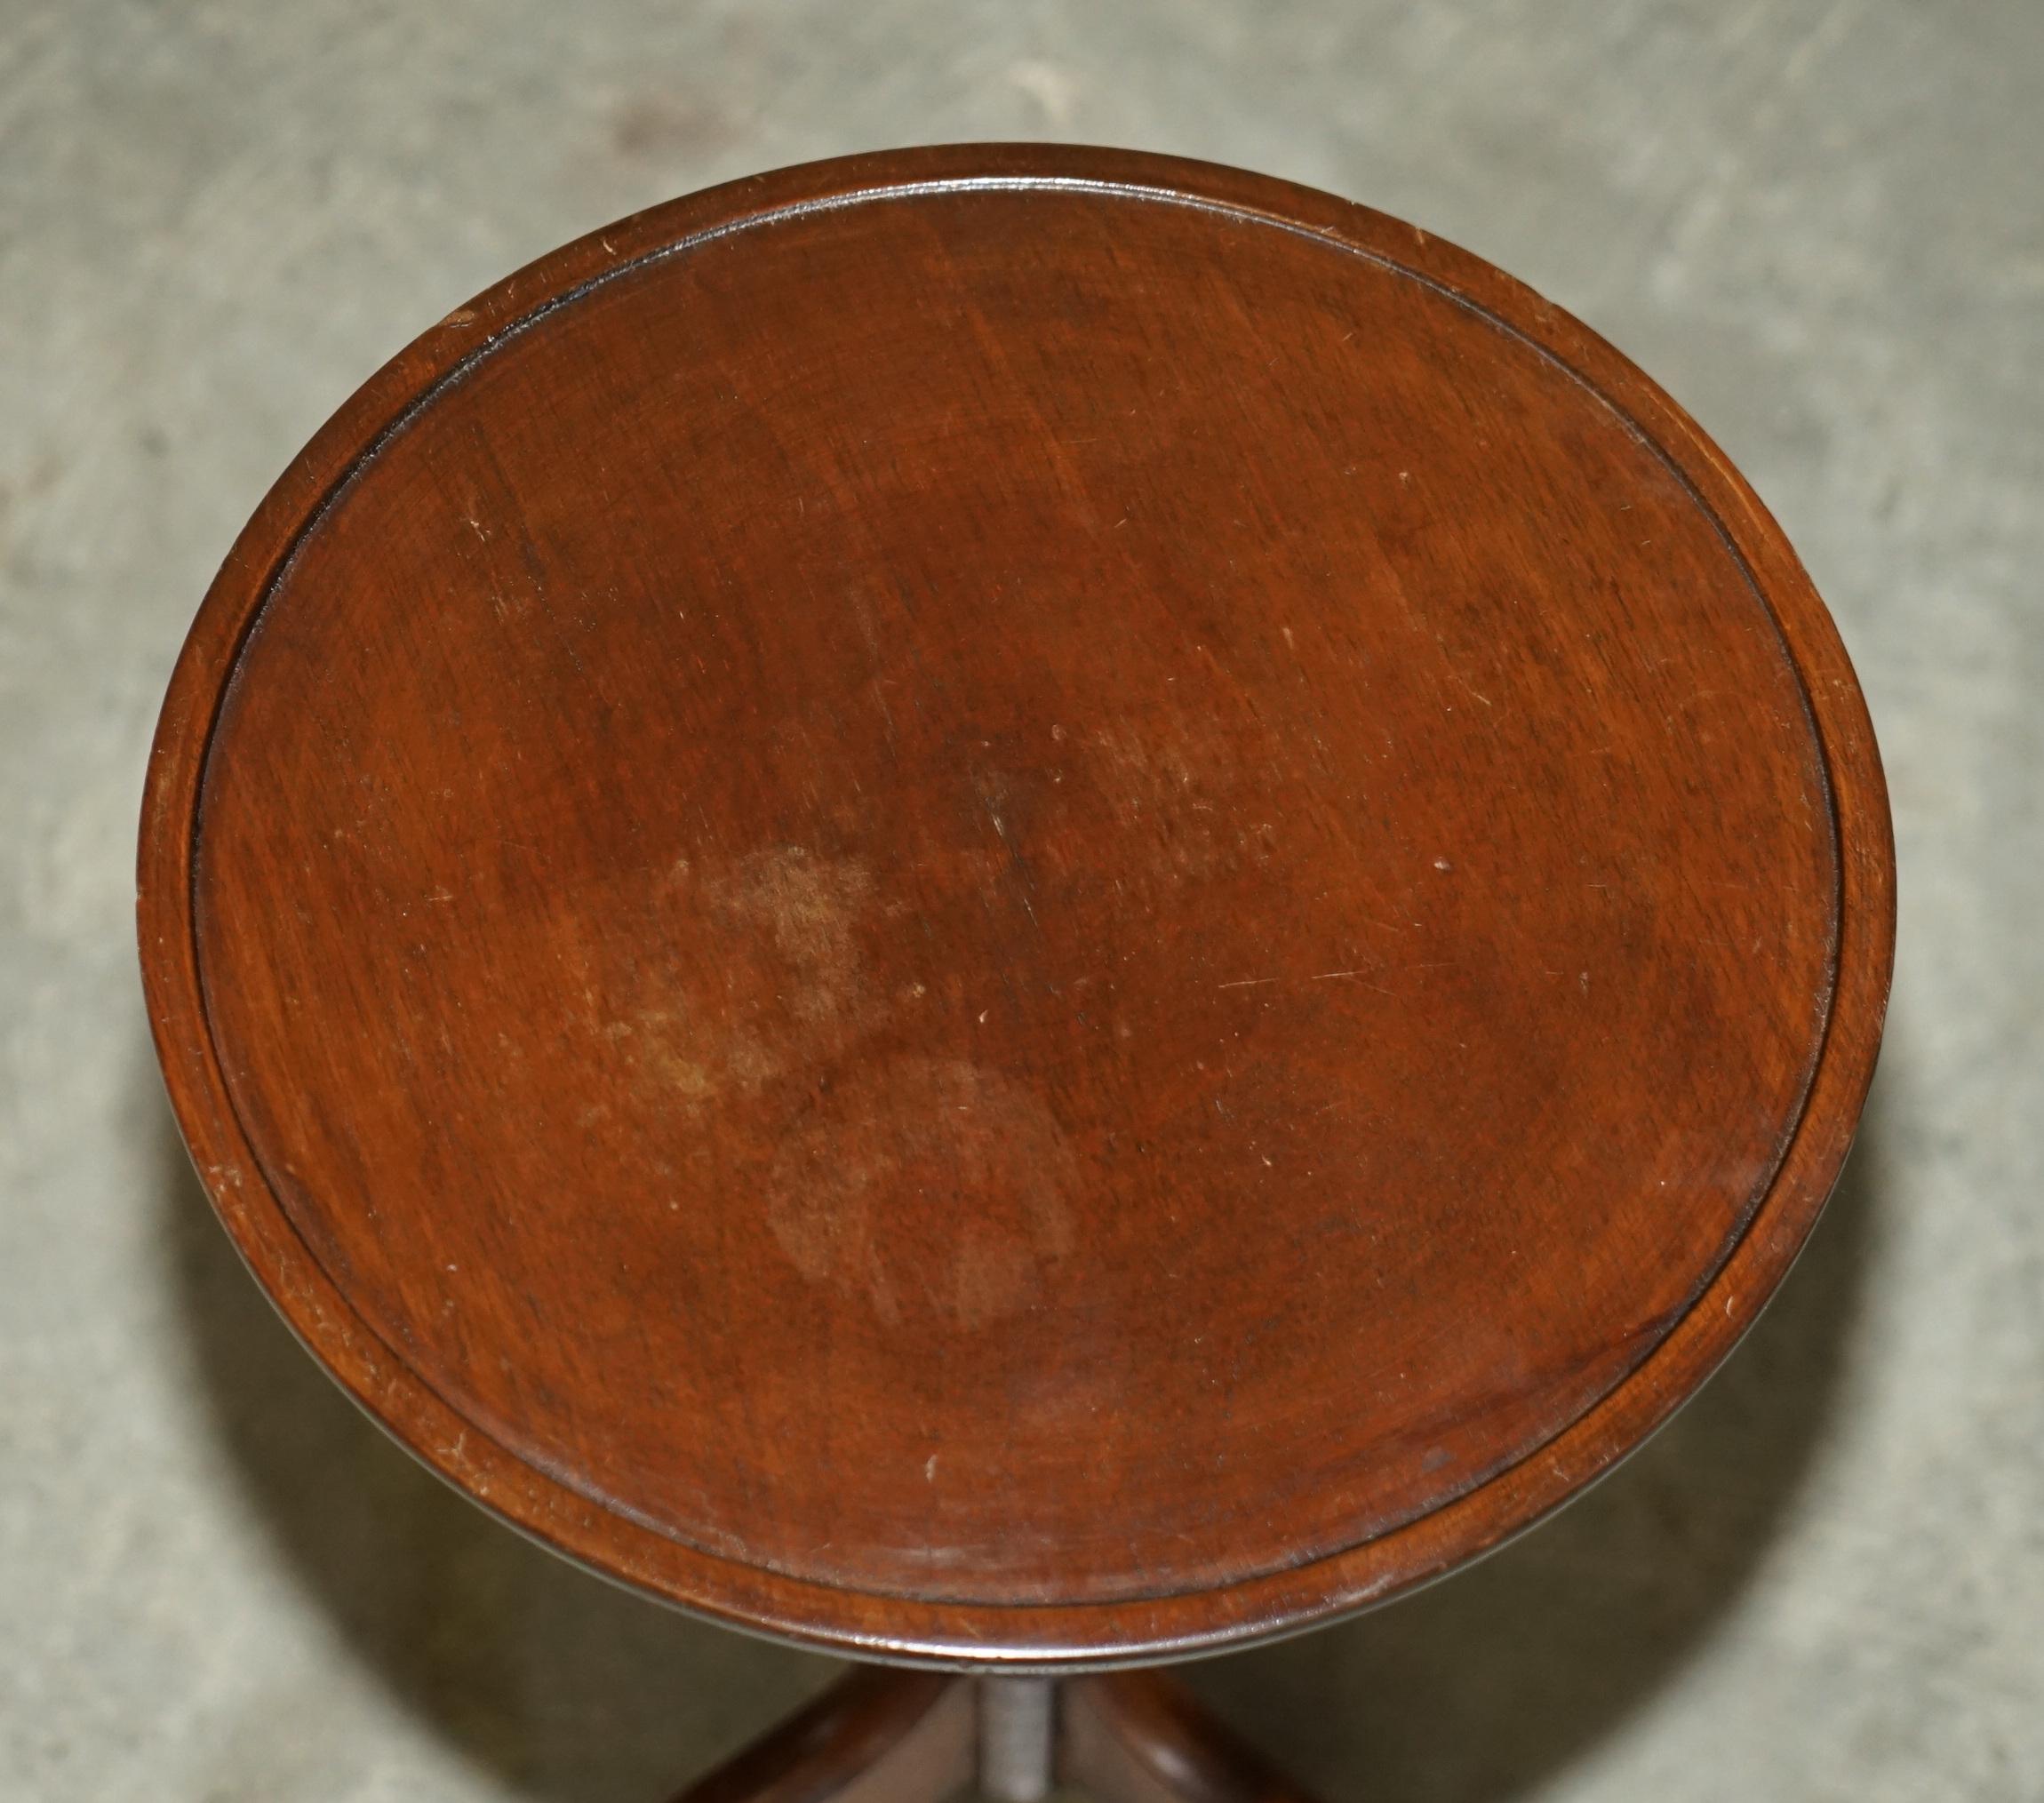 We are delighted to offer for sale this lovely vintage Mahogany lamp or side table with a nicely turned column base

A good-looking well-made tripod table in good condition throughout, we have cleaned waxed and polished it from top to bottom,